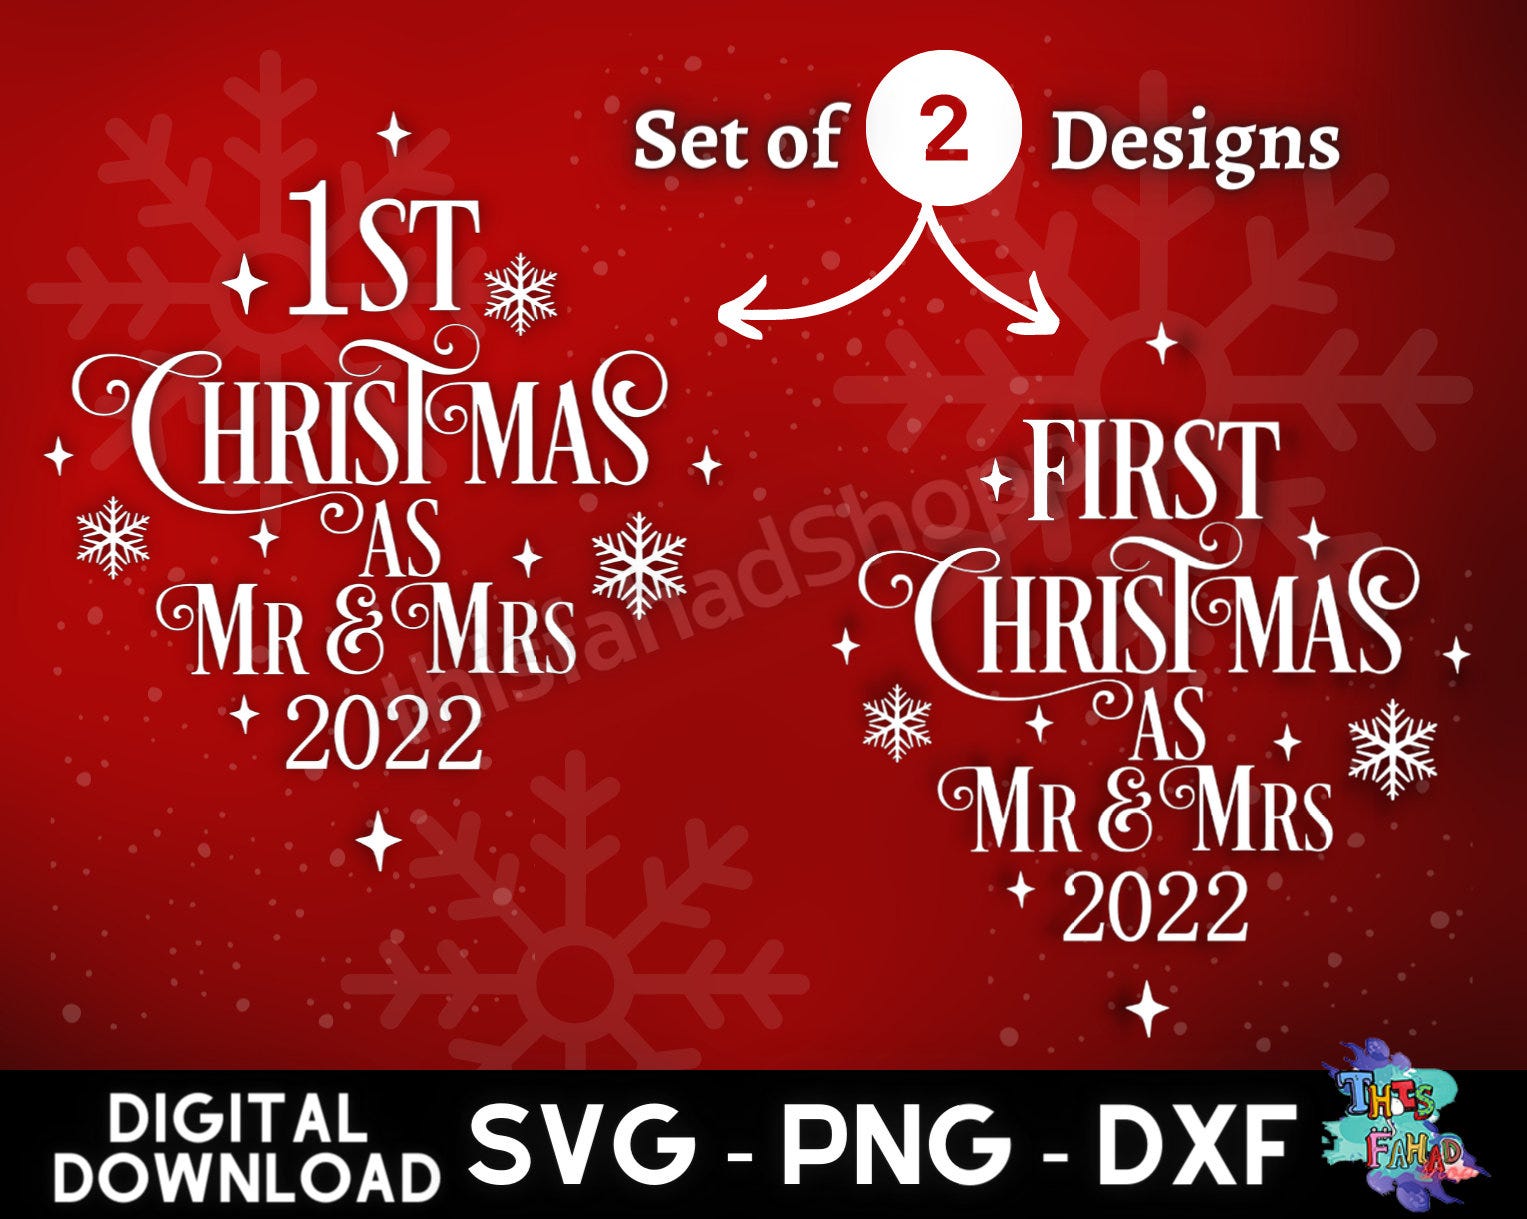 First christmas as mr and mrs SVG, Our first christmas ornament 2022, Arabesque Christmas ornaments, First christmas married ornaments.